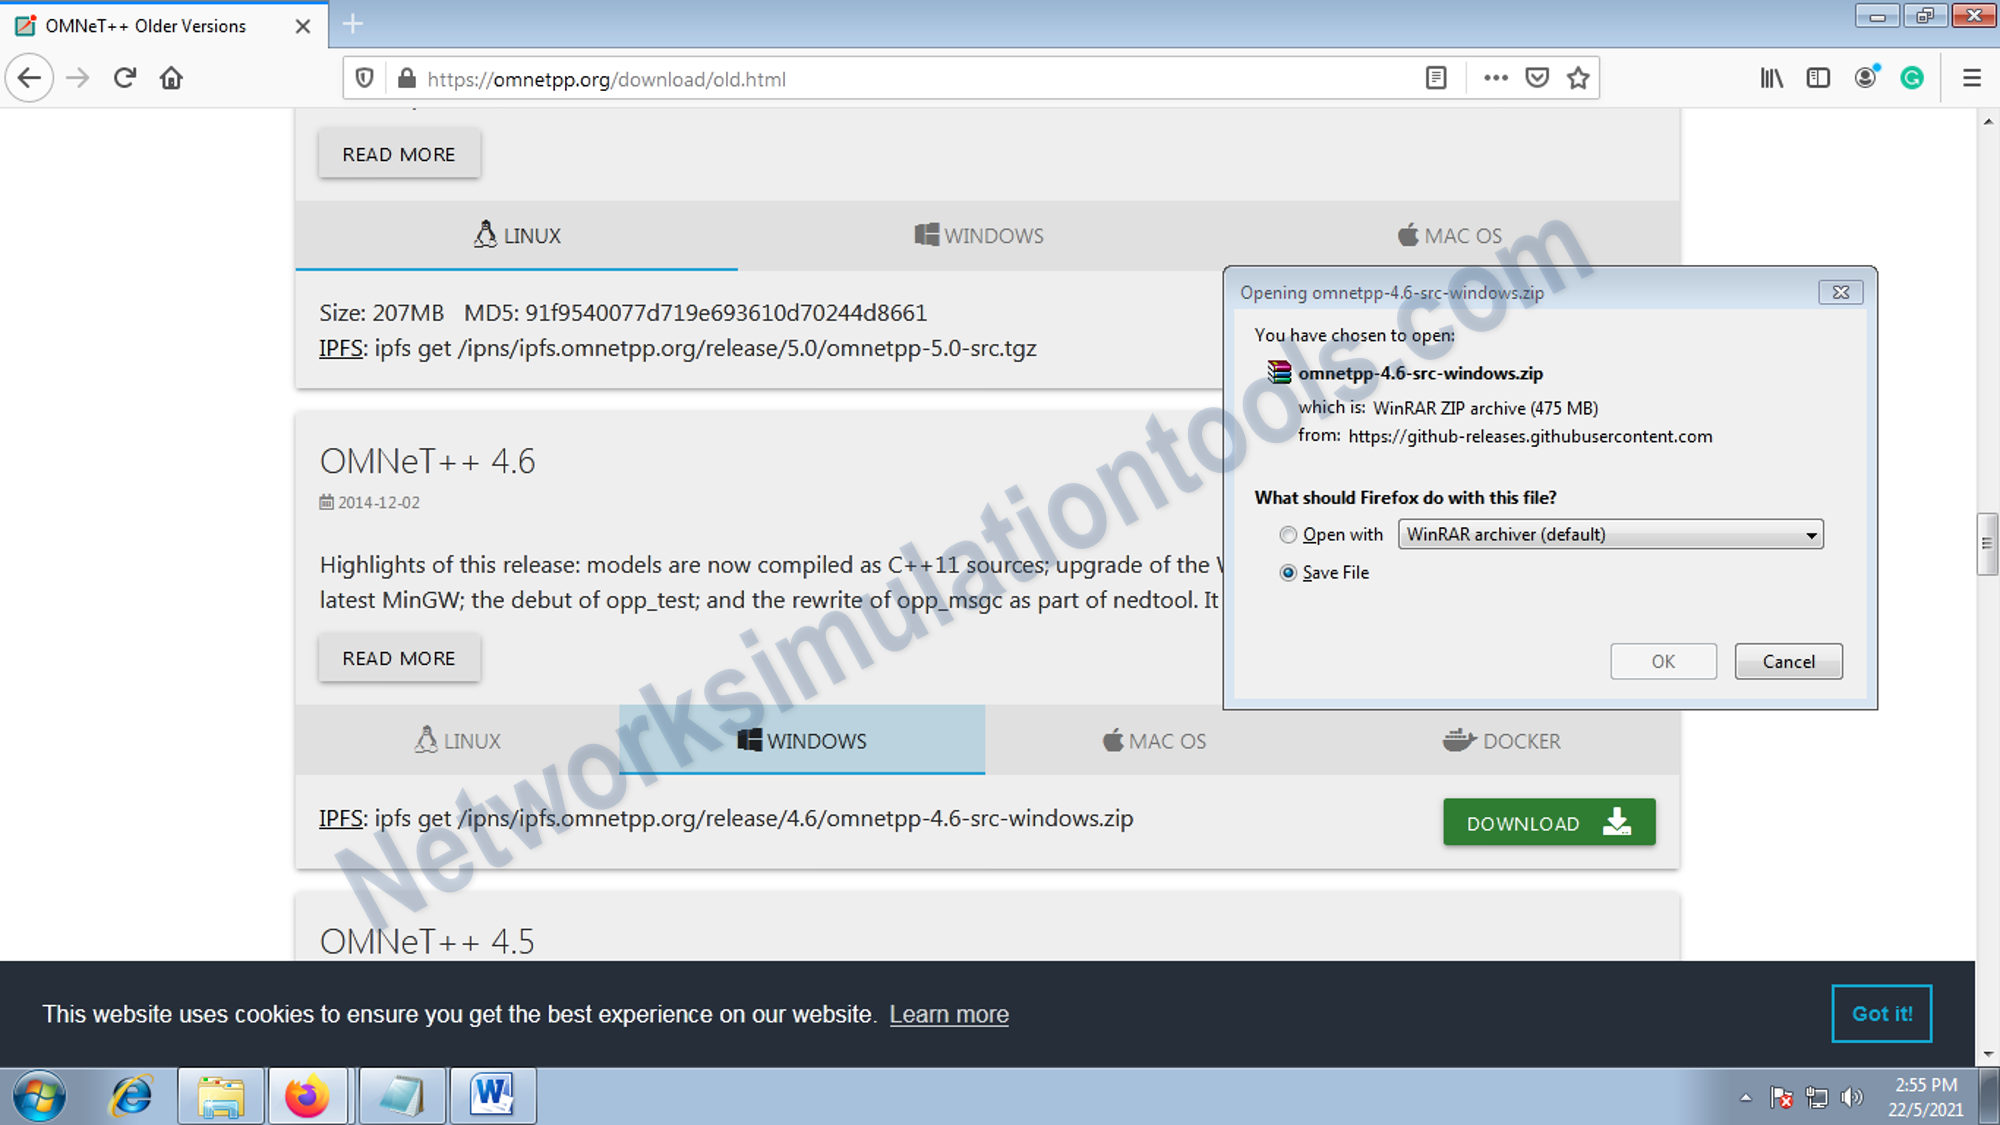 Download the omnet++ package